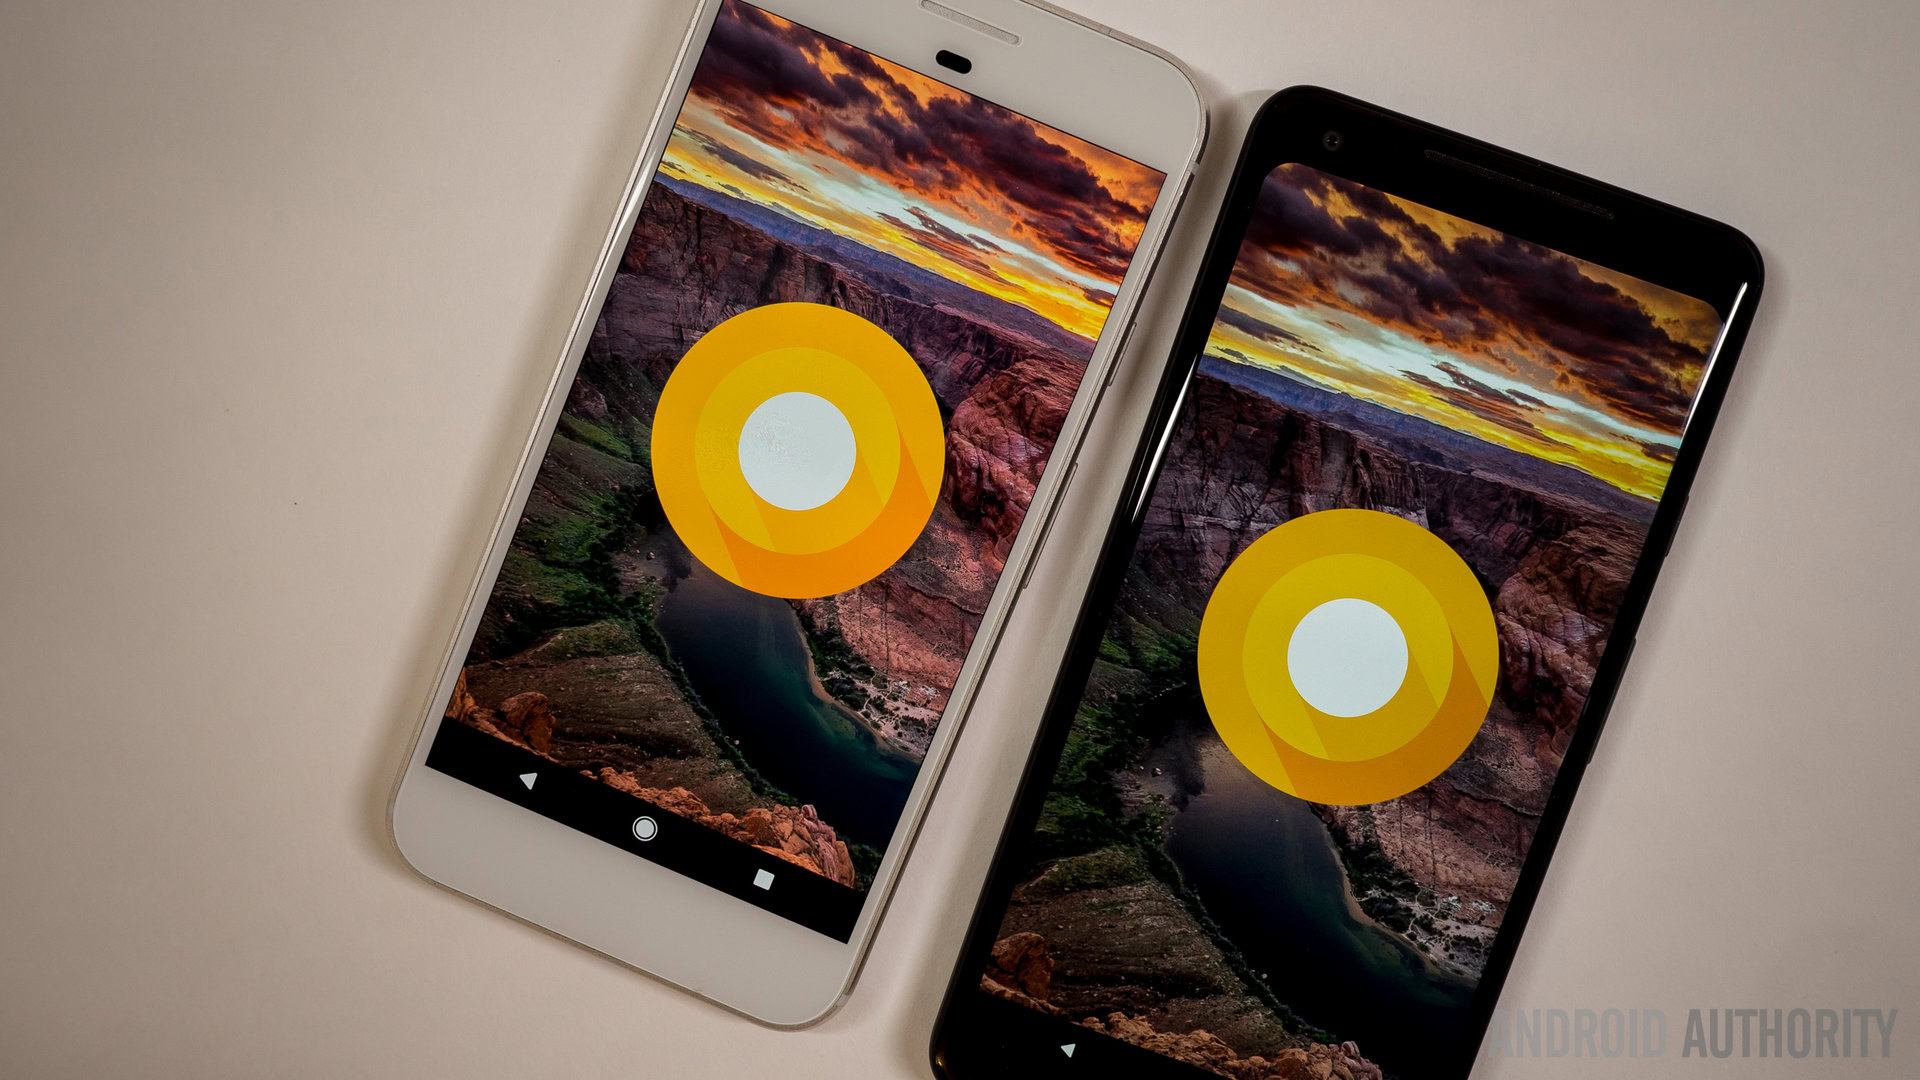 Google Pixel 2 XL vs Pixel XL: What's the difference?